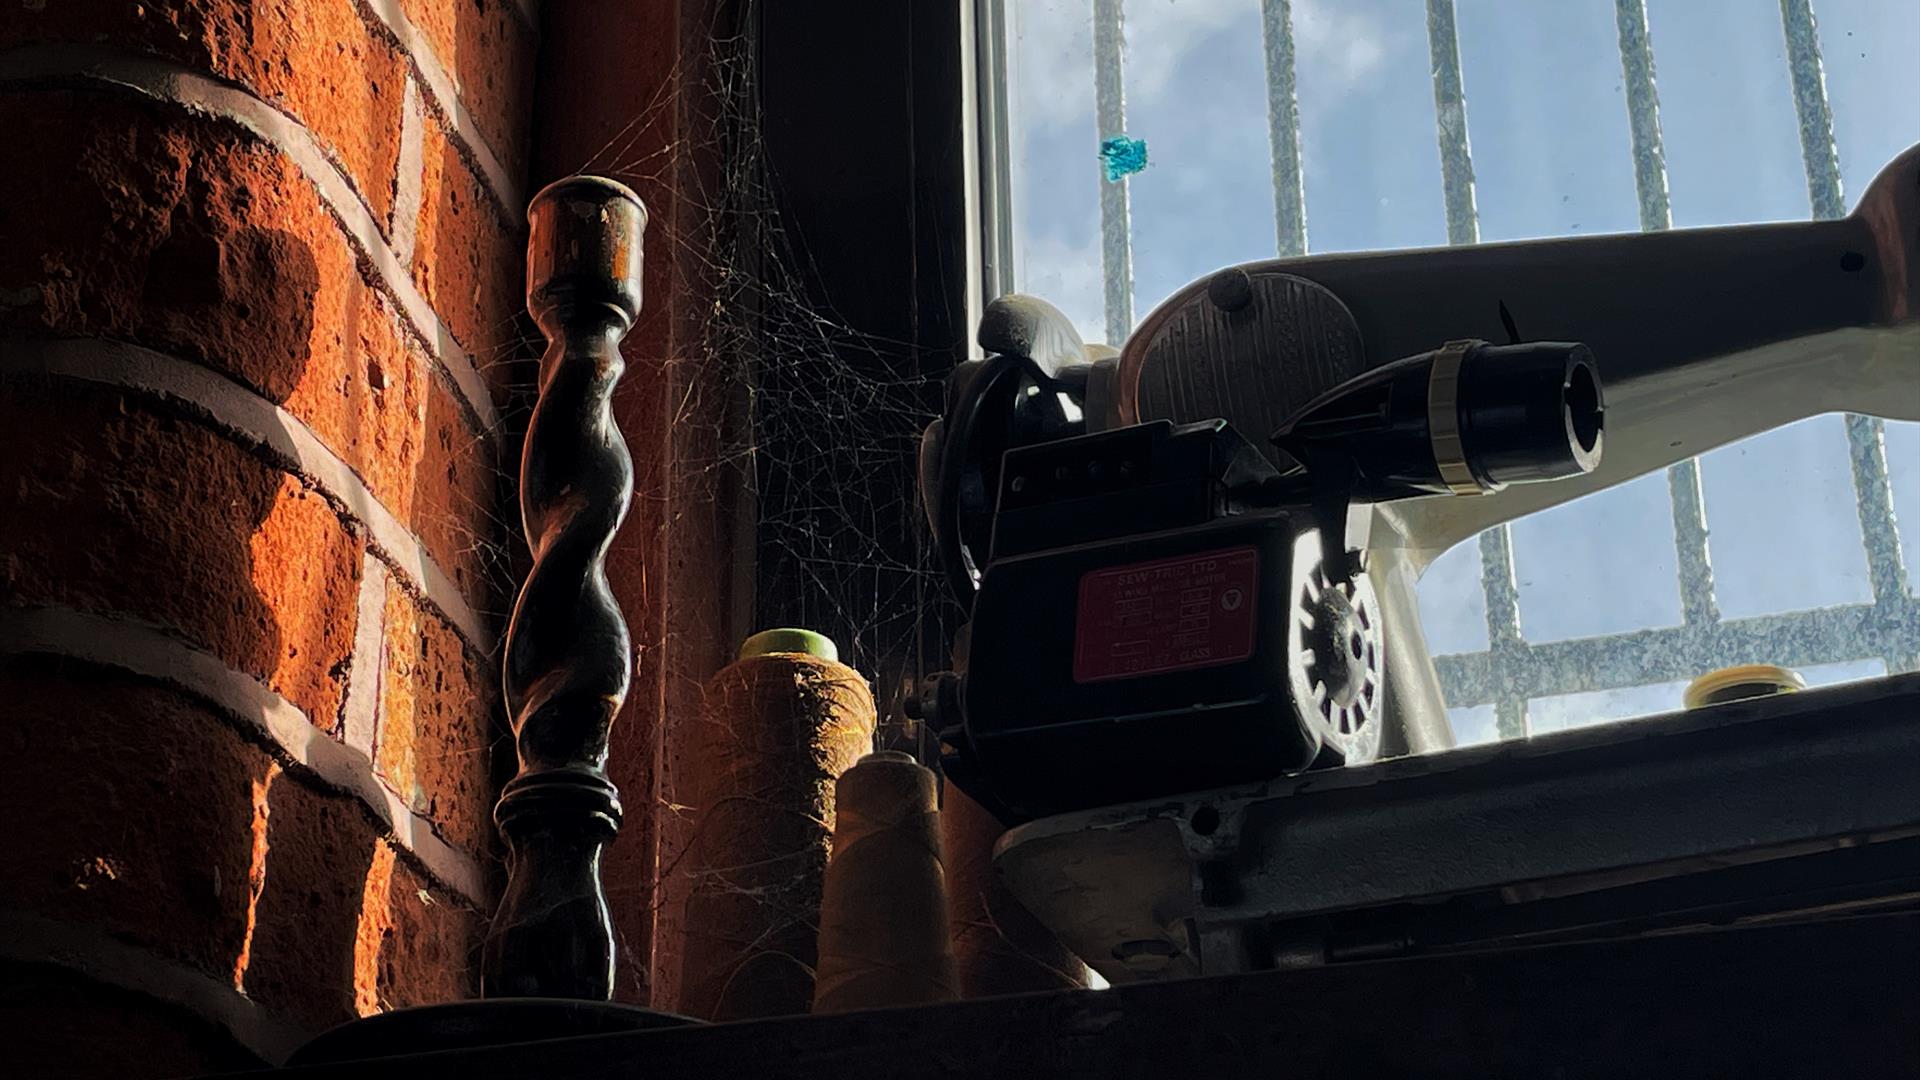 A candlestick and old sewing machine on a windowsill covered in cobwebs and dust.